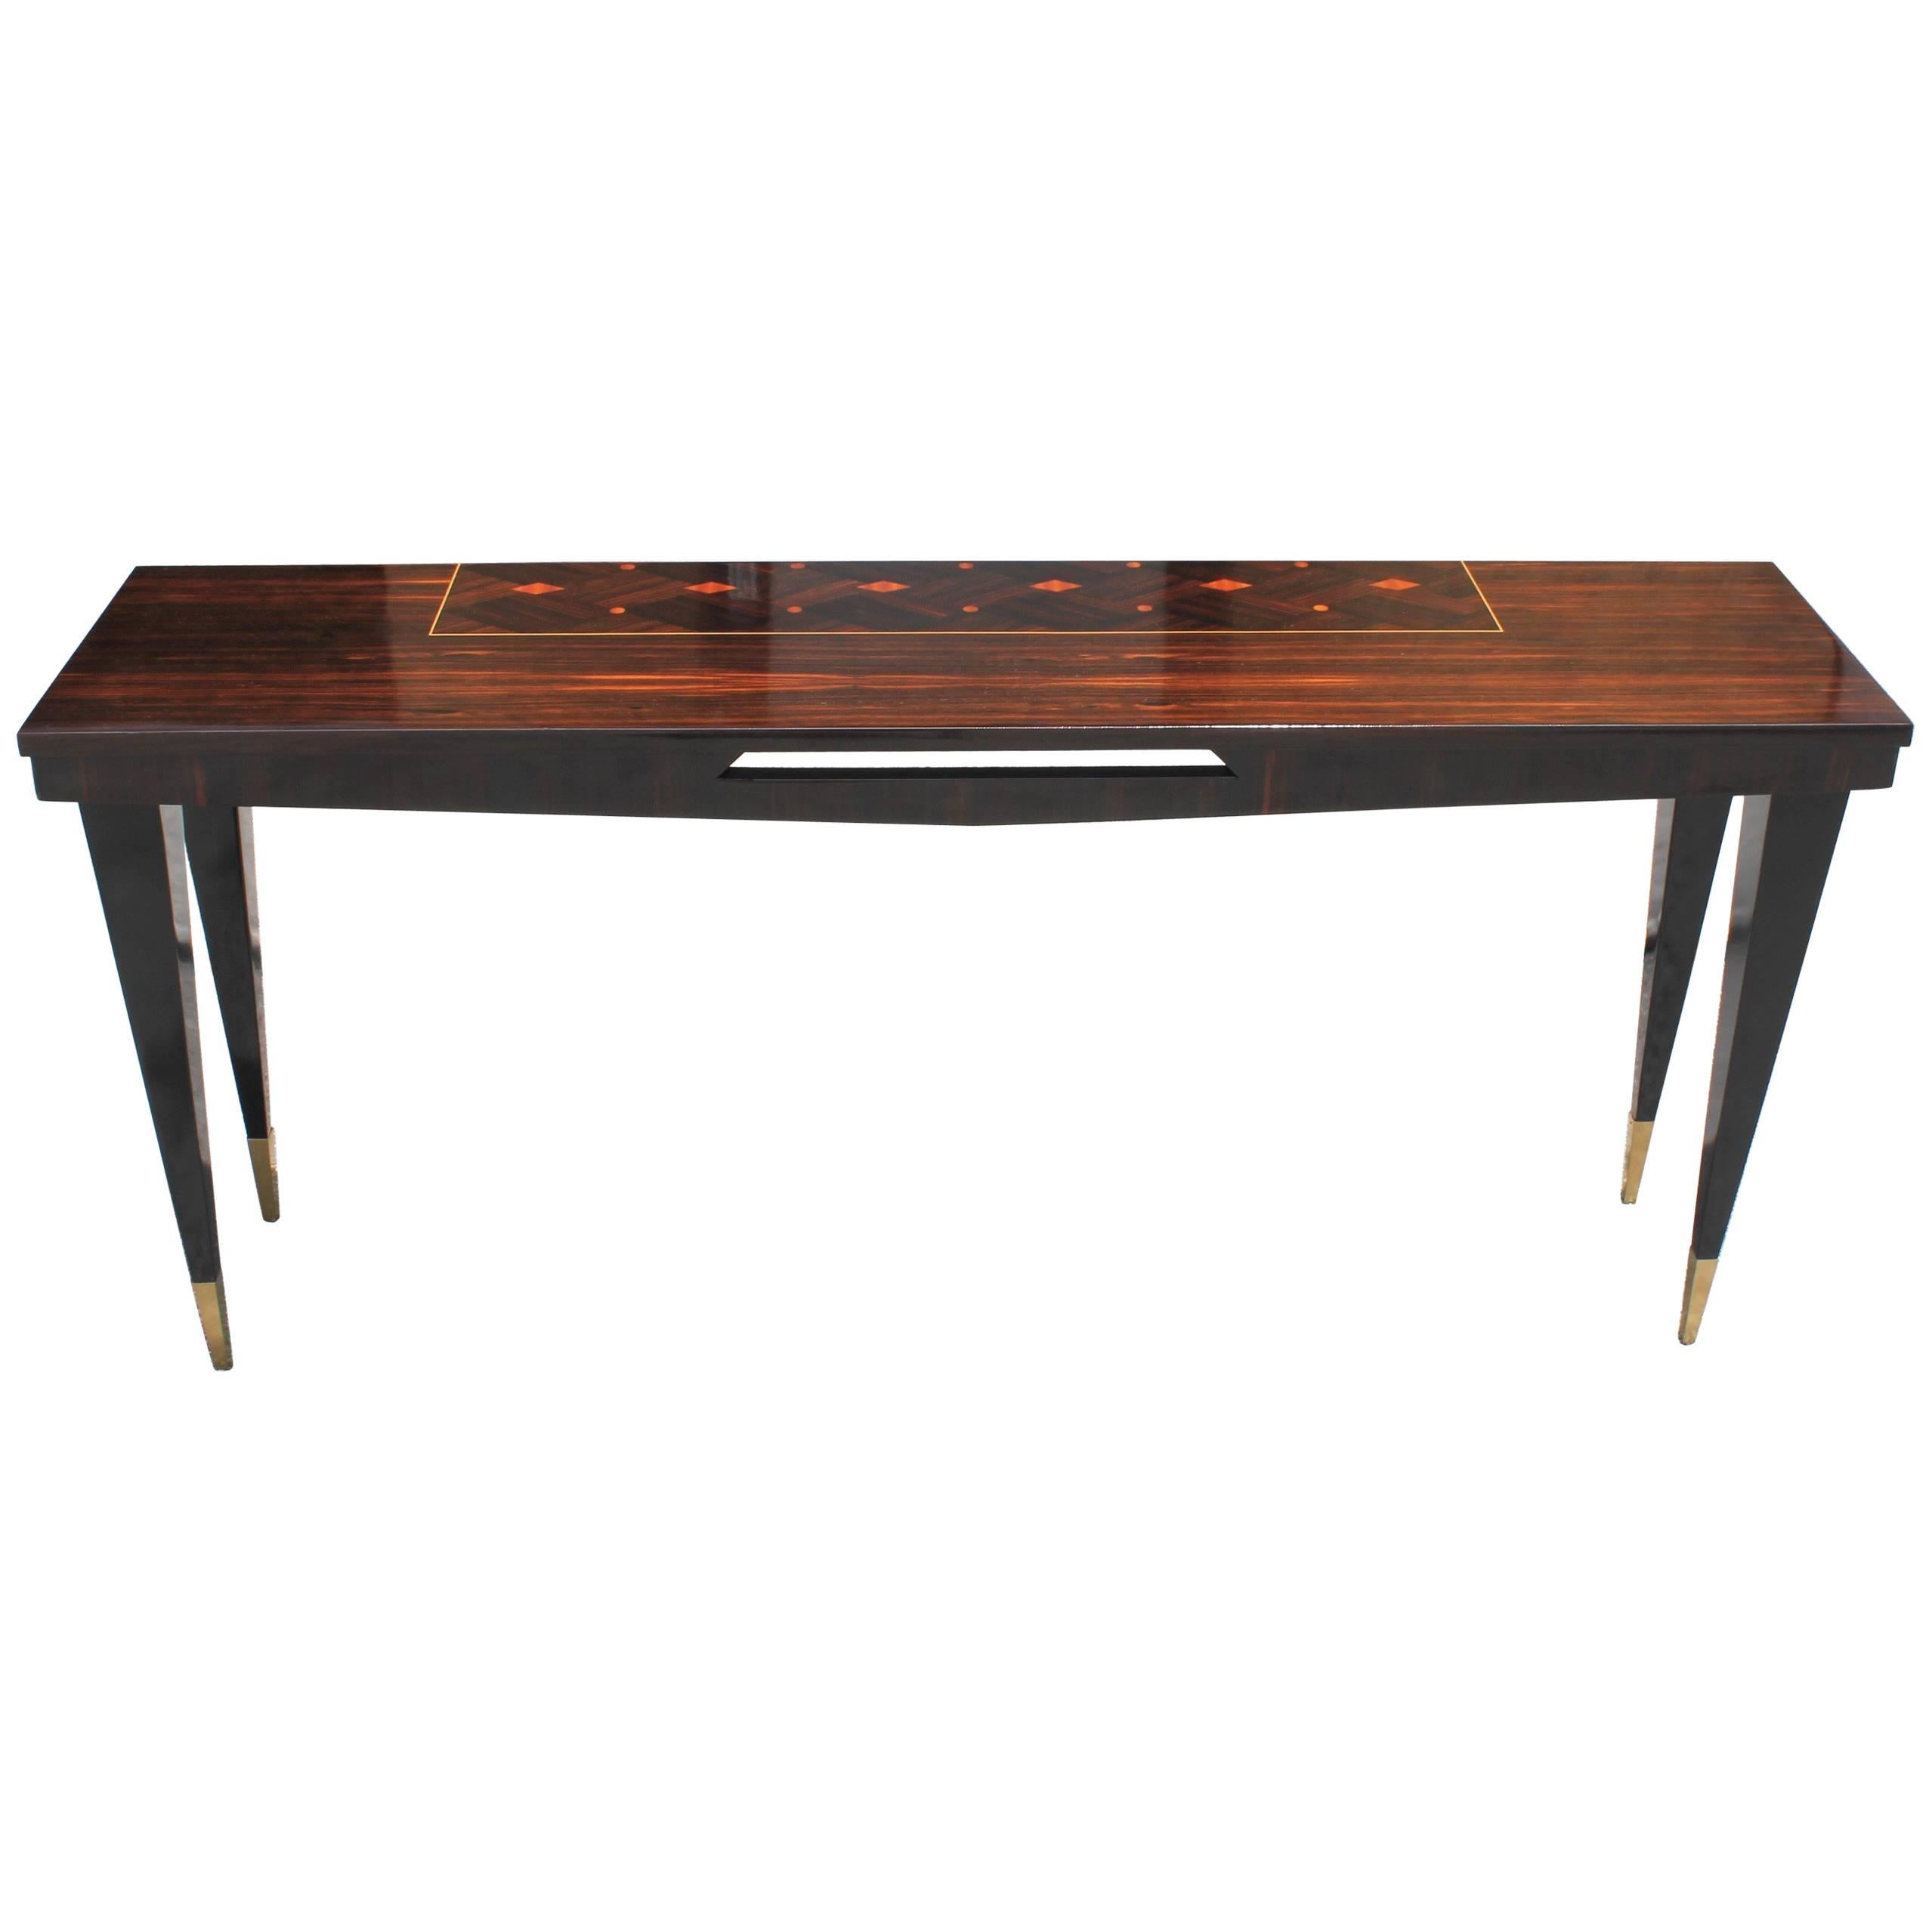 Long French Art Deco Exotic Macassar Ebony Console Table, circa 1940s For Sale